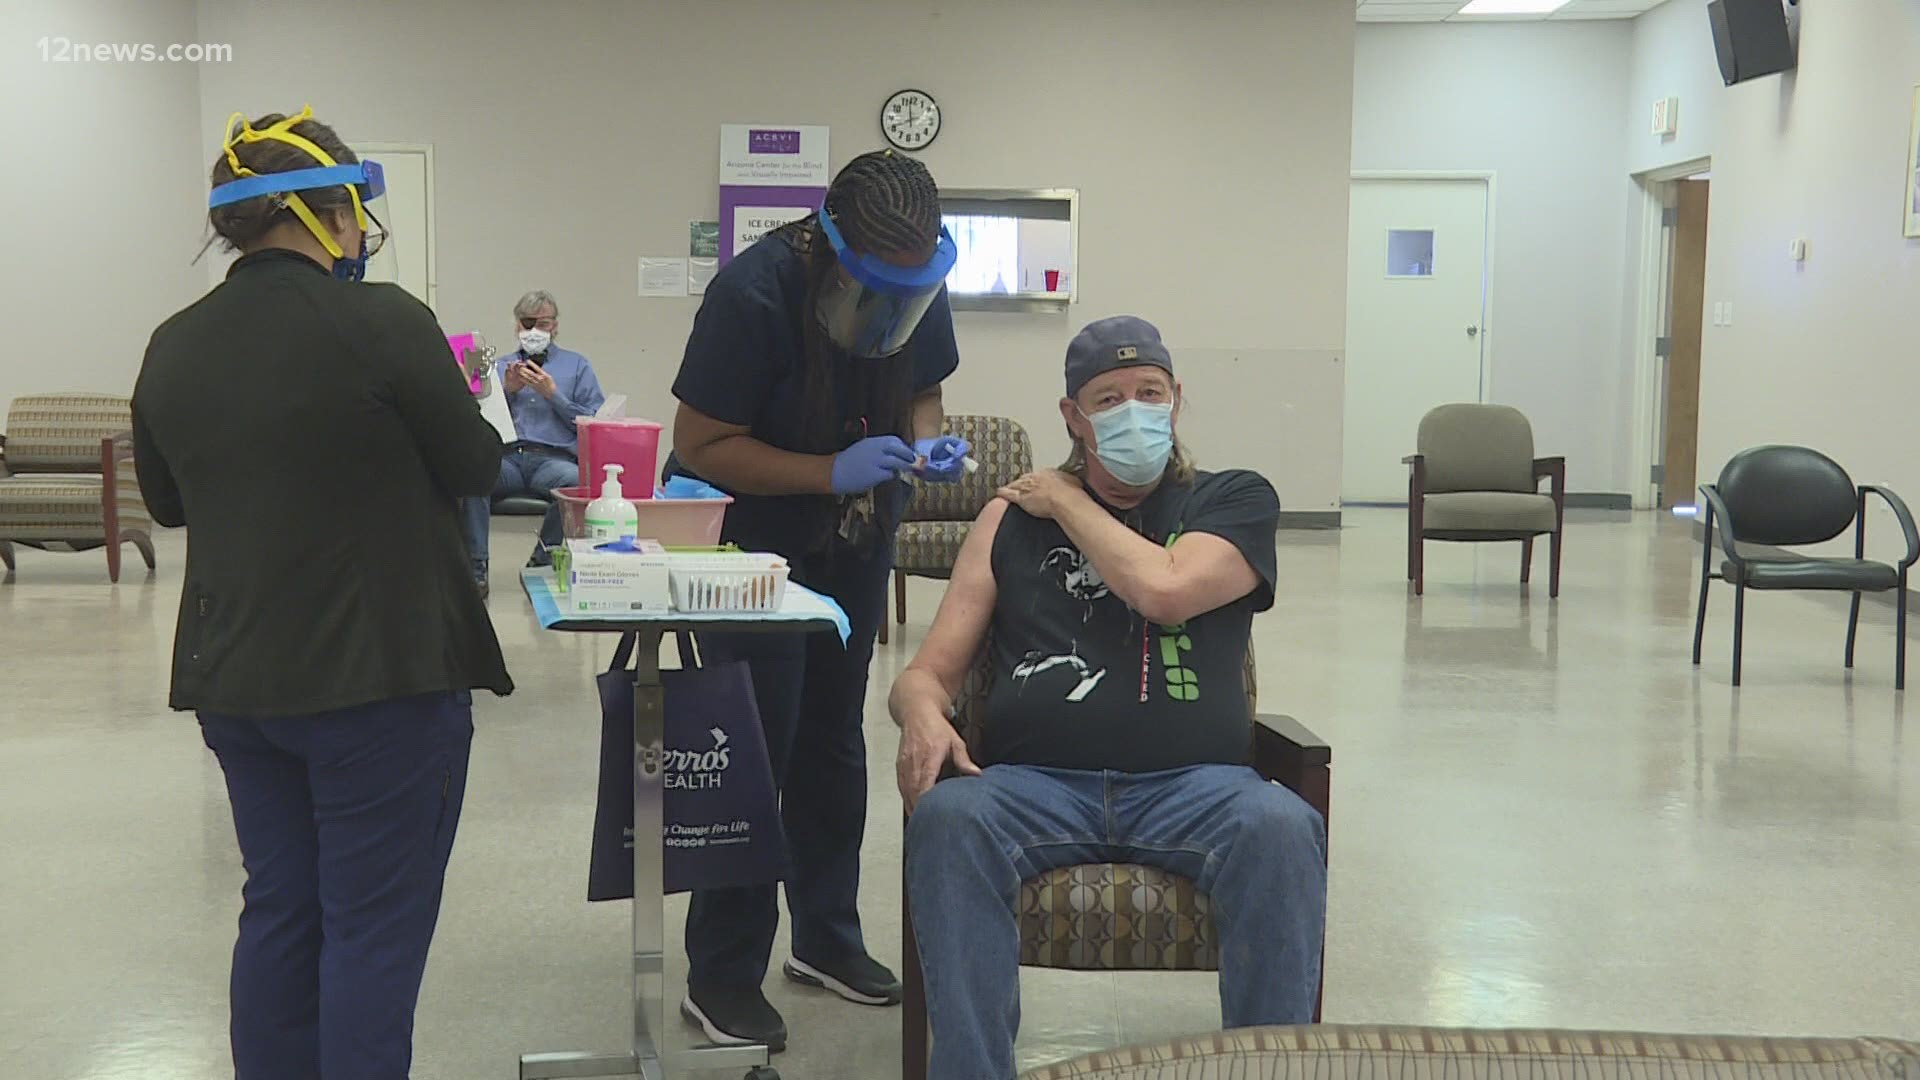 Arizona Center for the Blind and Visually Impaired along with Terros Health worked to get the visually impaired vaccinated against COVID-19 on Monday.